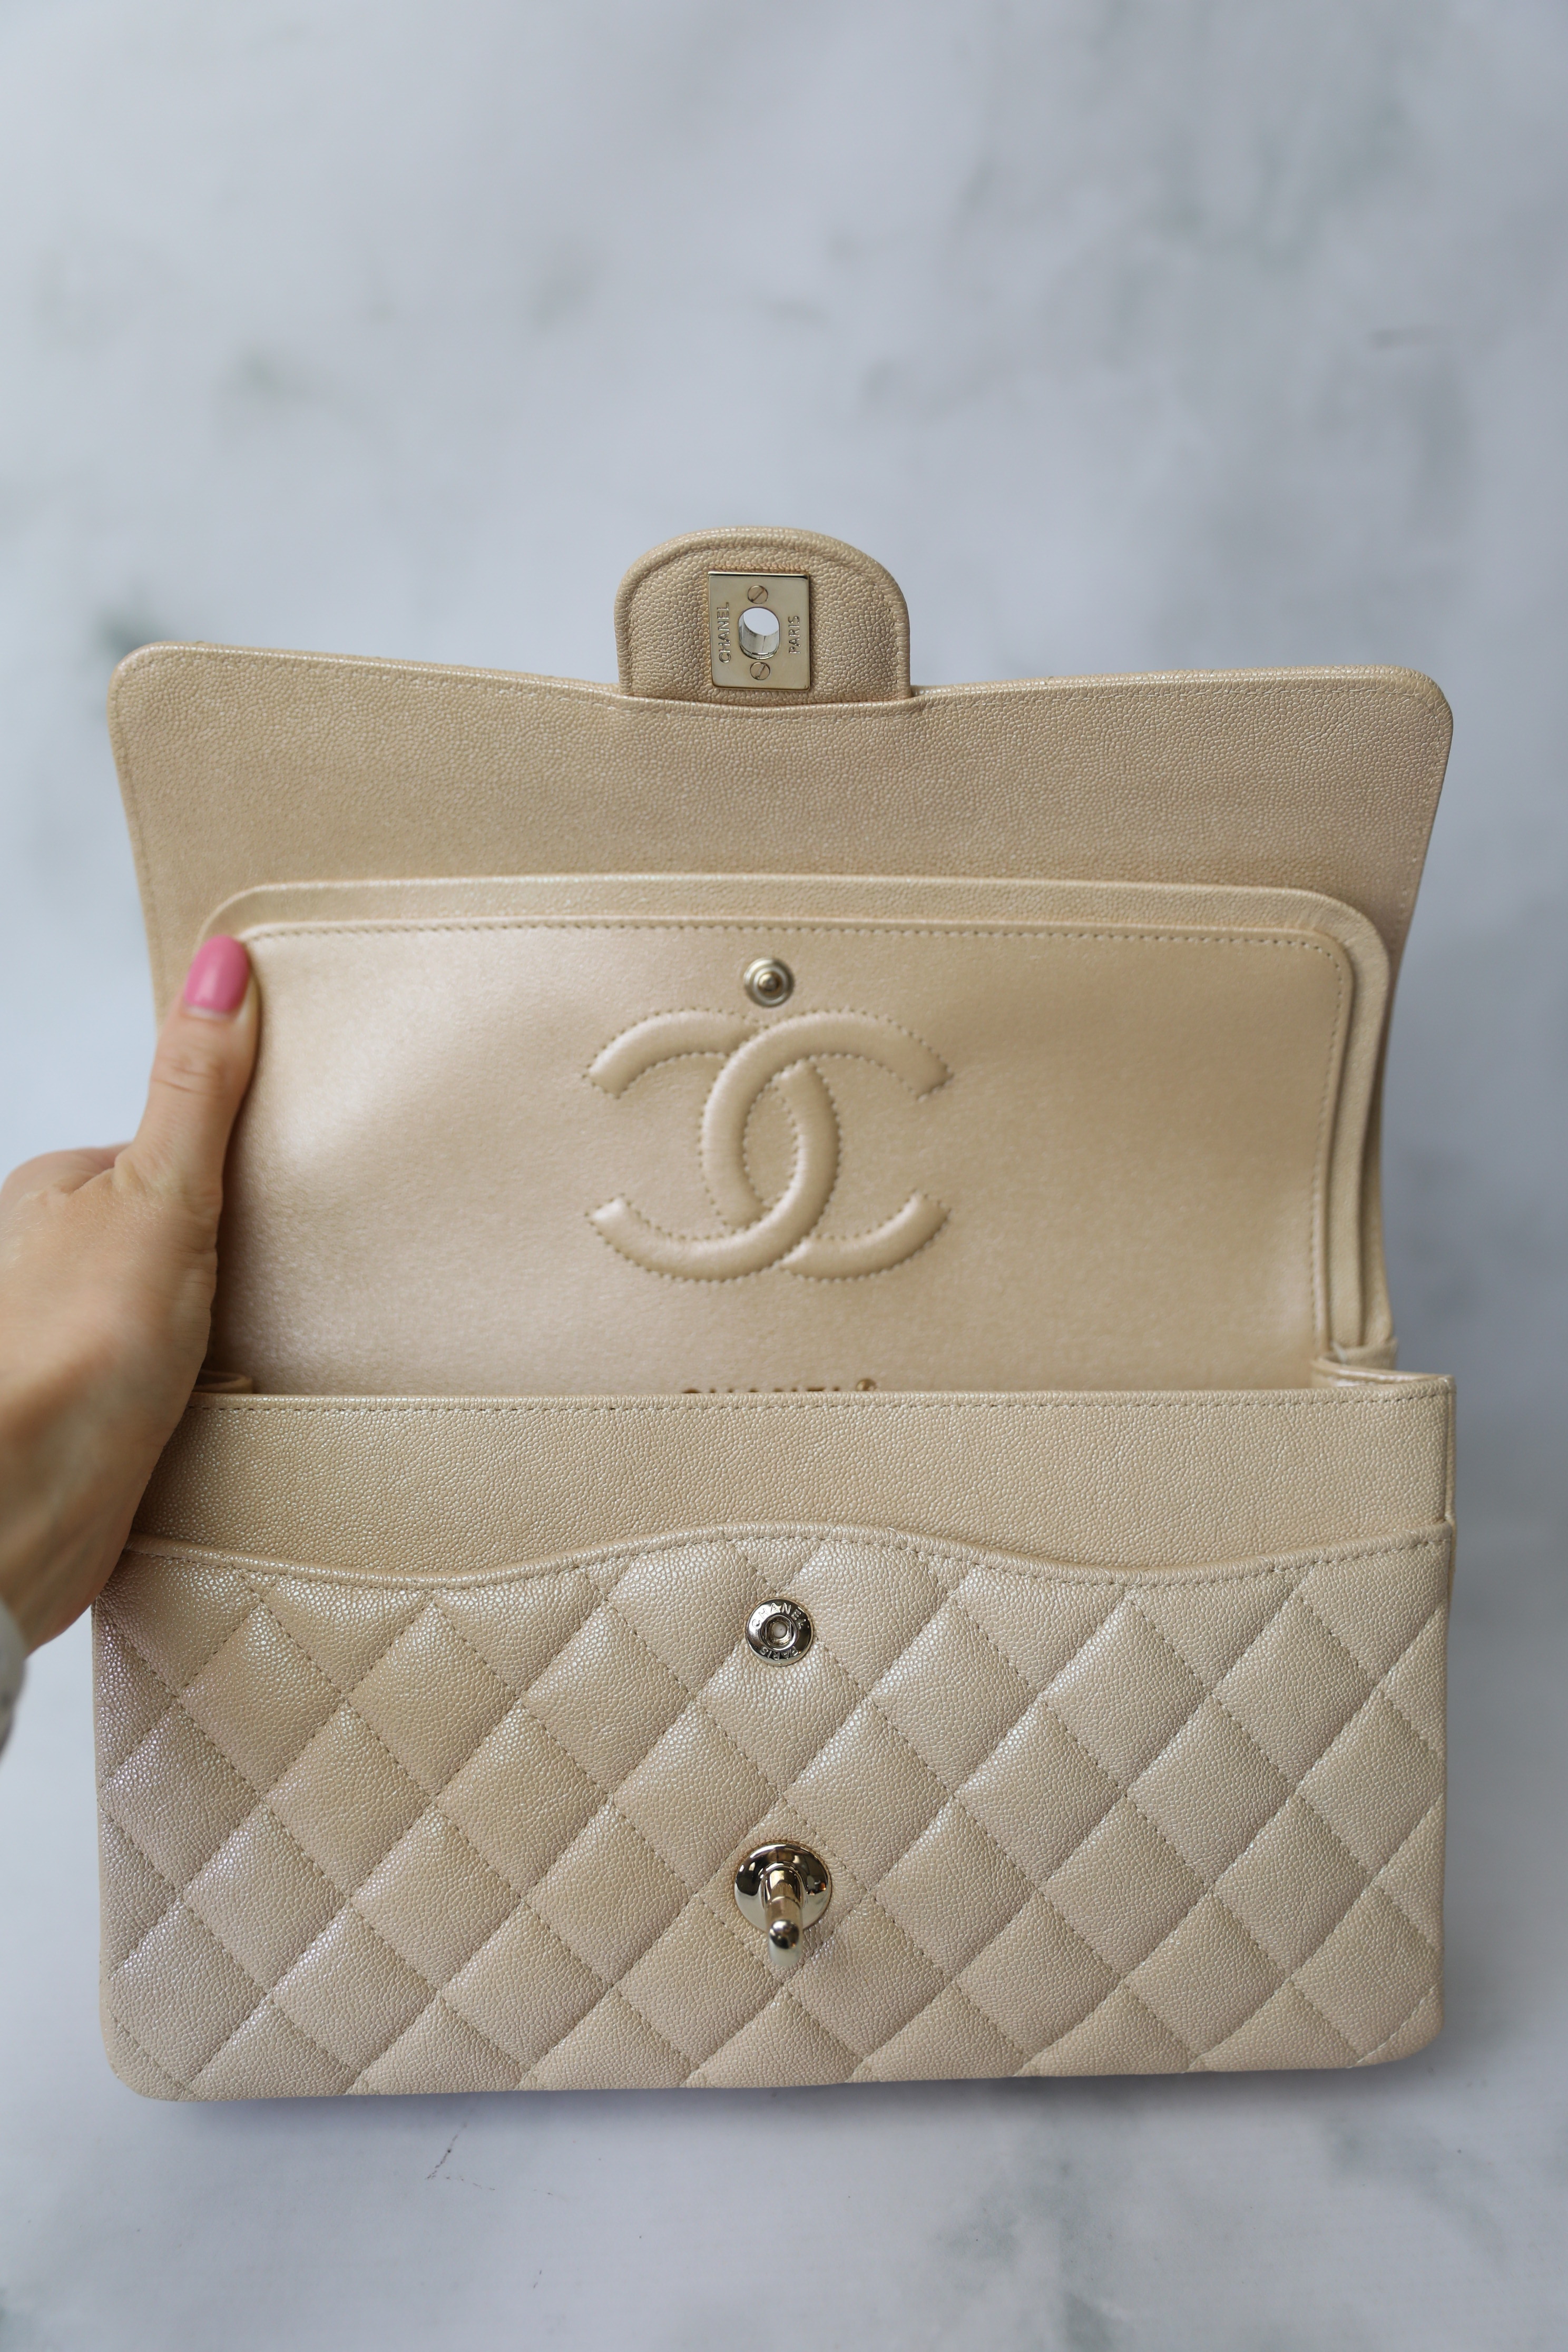 6th Dhgate Unboxing Review: Chanel Flap in Beige 